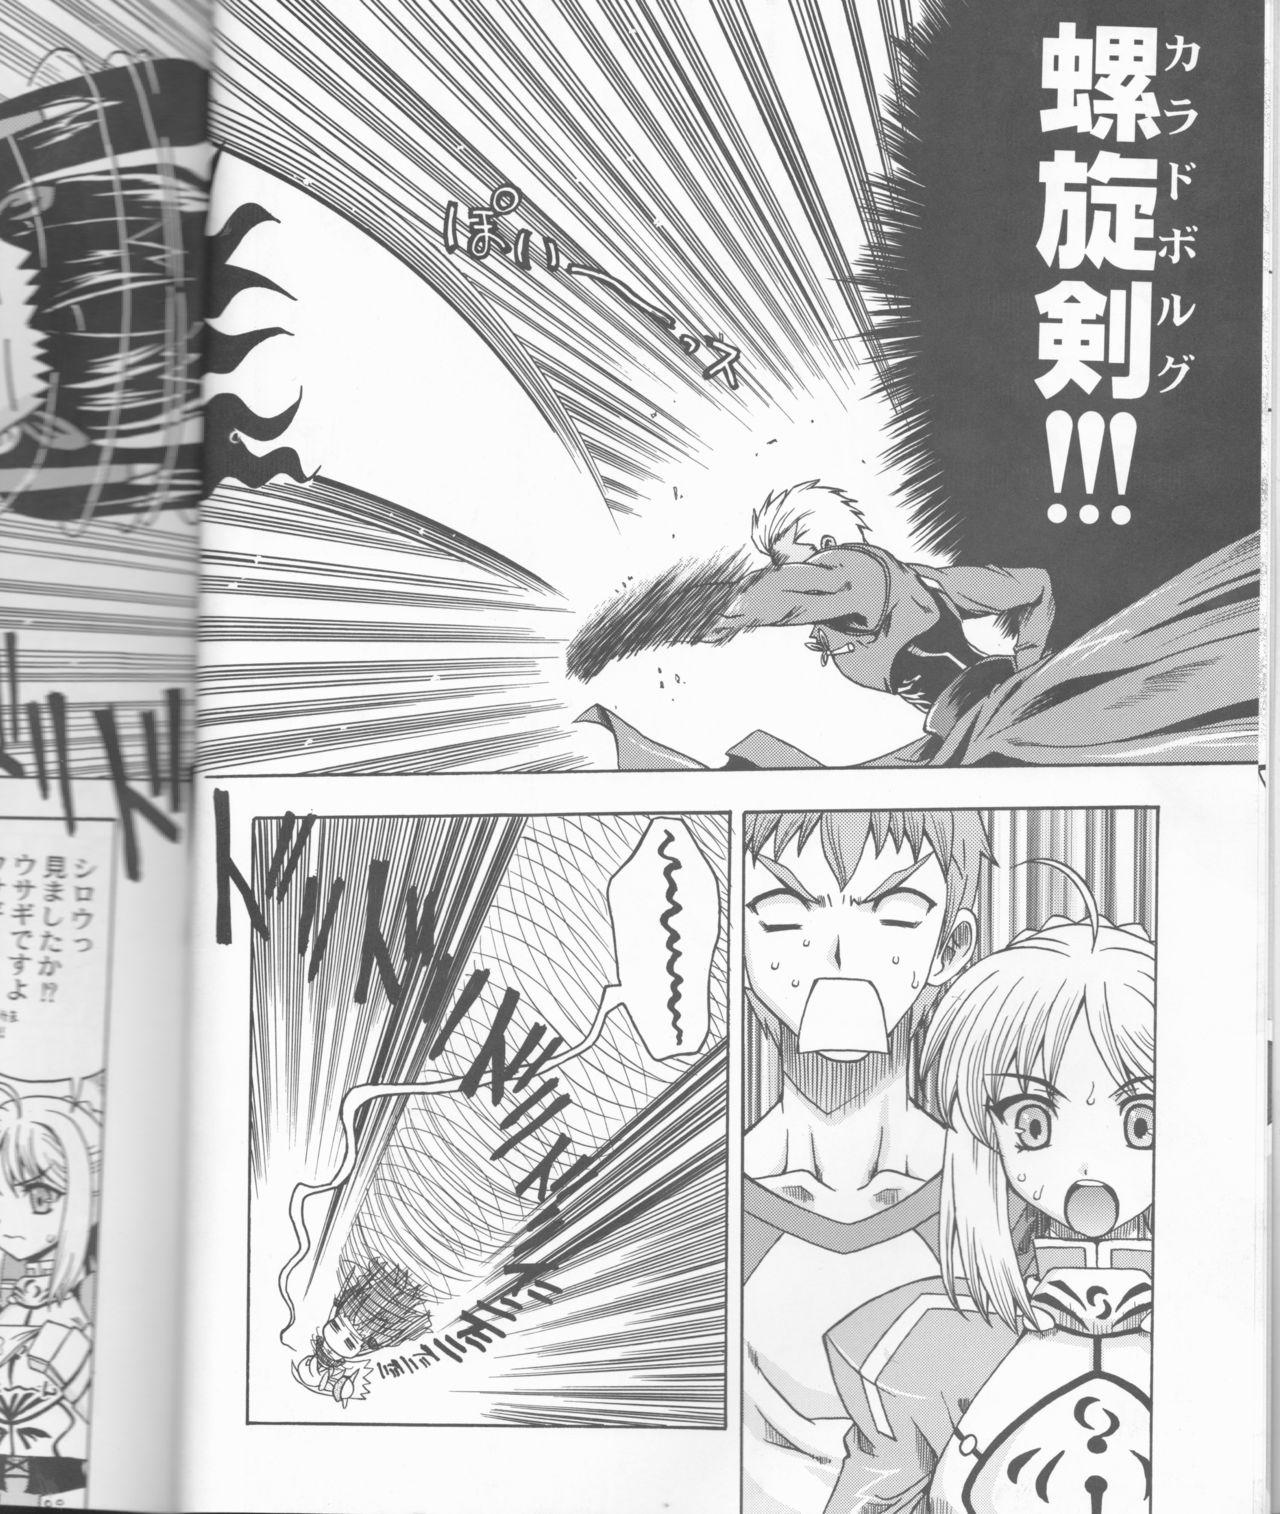 Free Blowjobs Going My Way - Fate stay night Pov Blowjob - Page 9